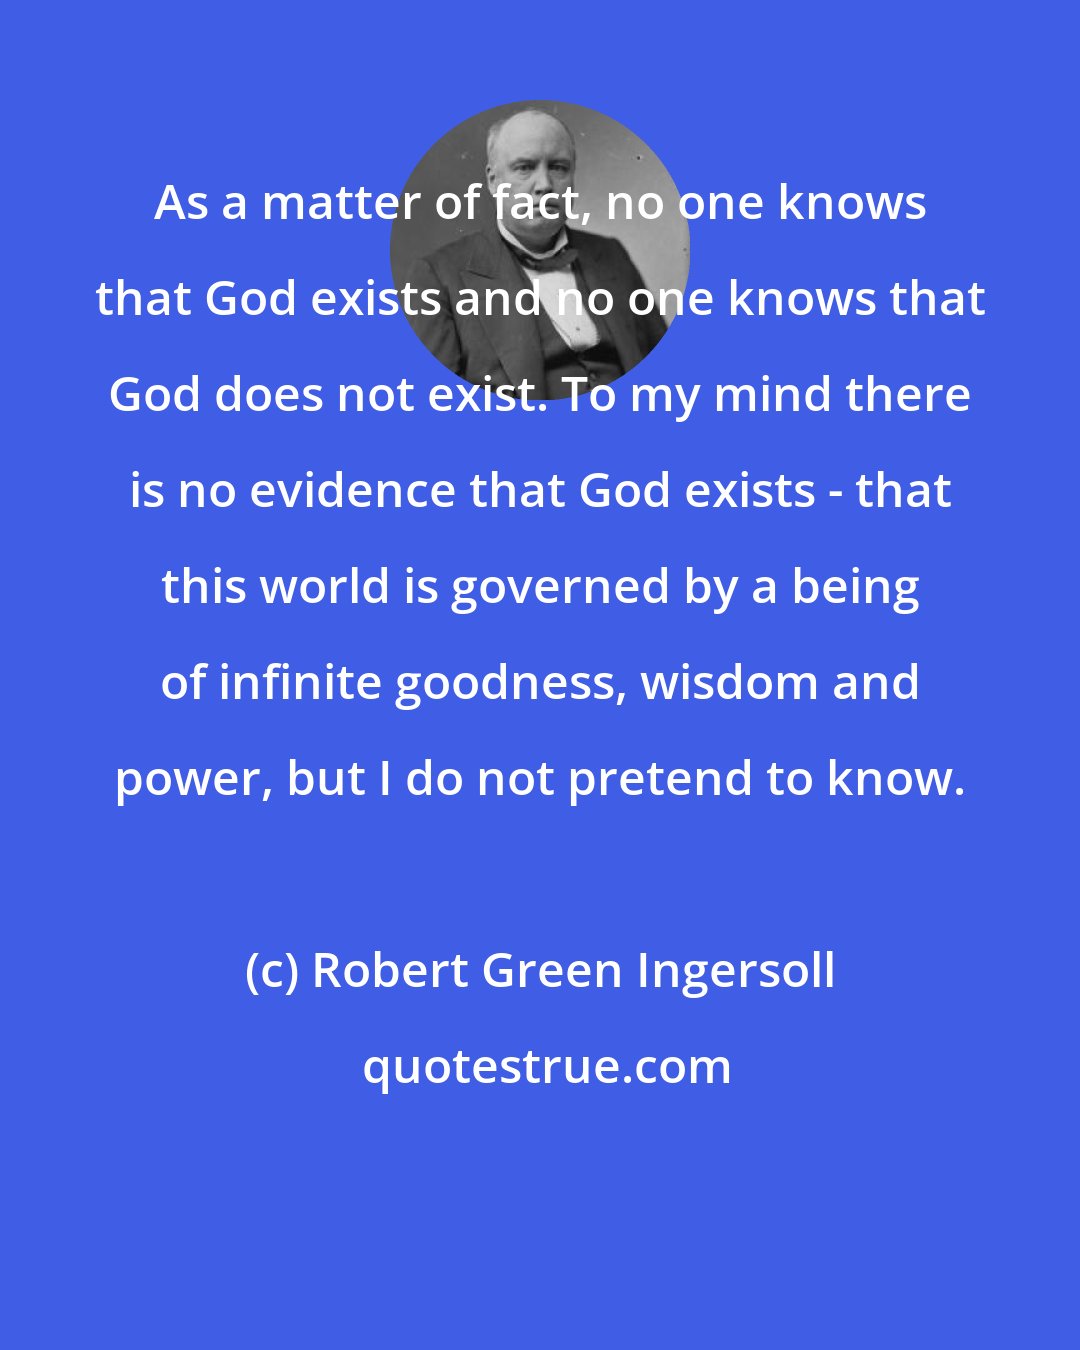 Robert Green Ingersoll: As a matter of fact, no one knows that God exists and no one knows that God does not exist. To my mind there is no evidence that God exists - that this world is governed by a being of infinite goodness, wisdom and power, but I do not pretend to know.